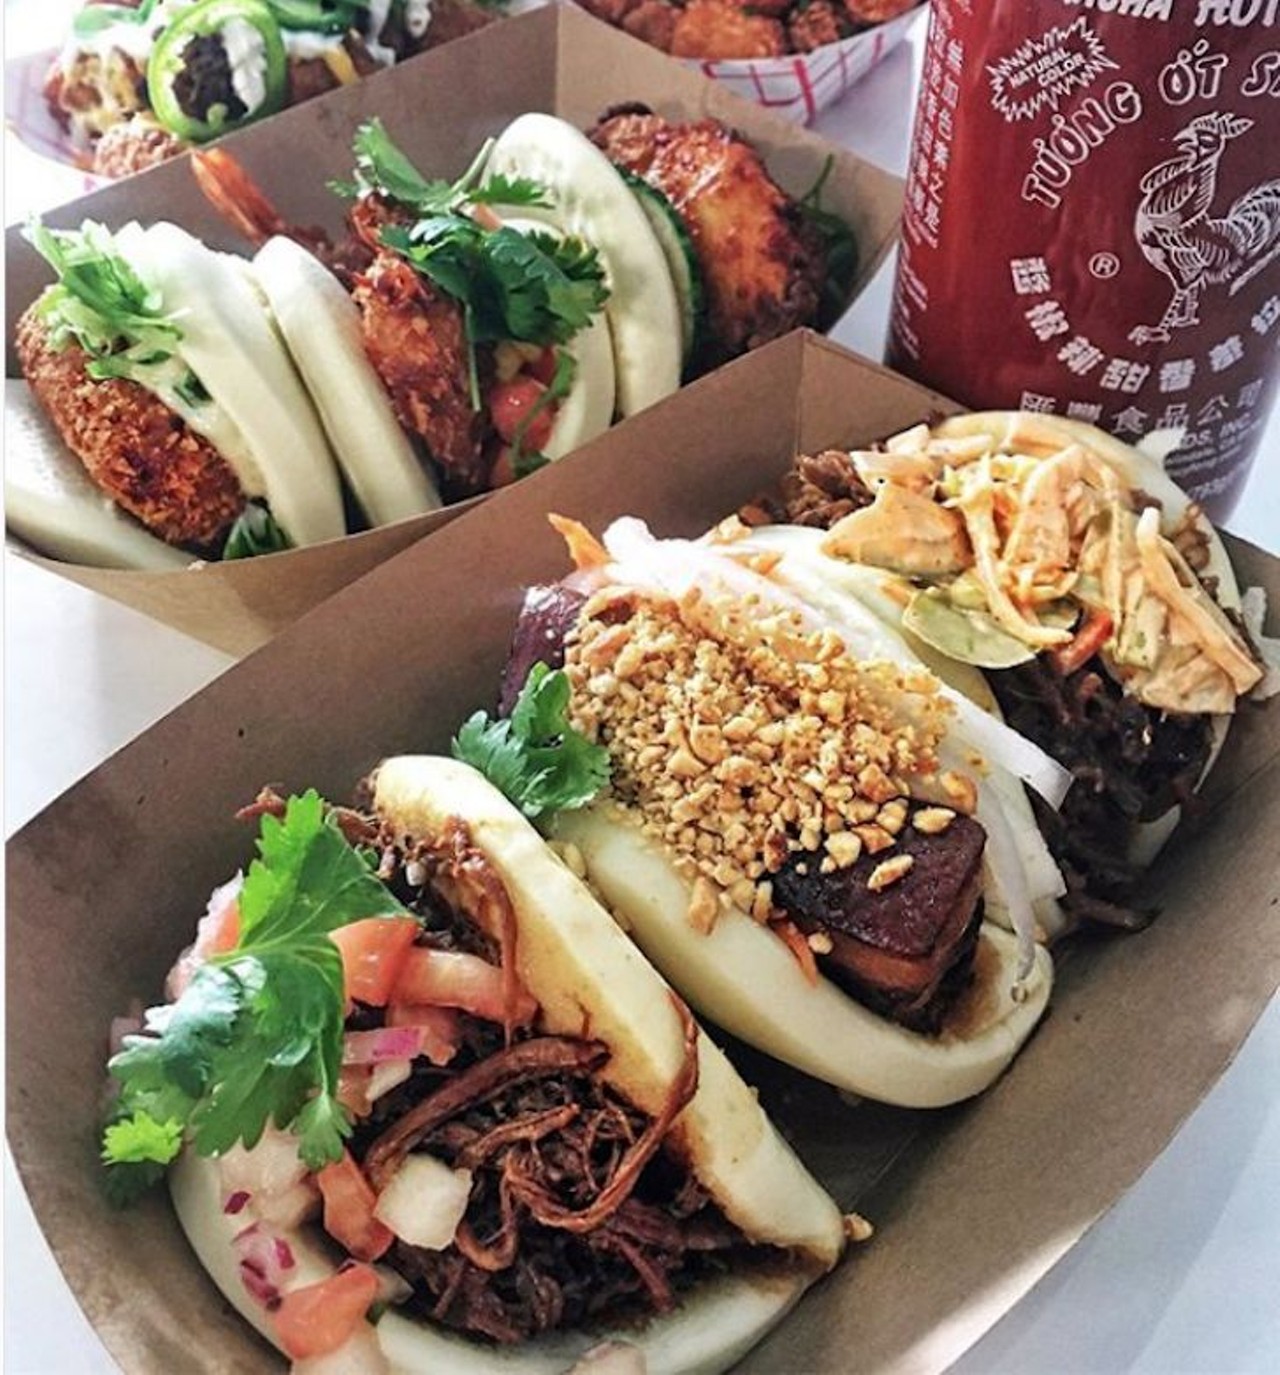 King Bao
710 N. Mills Ave., 407-237-0013  
King Bao is easy to miss but hard to pass up. Their steamed buns come filled with your choice of options, like the popular "hogzilla," which is braised pork belly and try the firecracker shrimp that is marinated in chili lime.
Photo via tina_band/Instagram